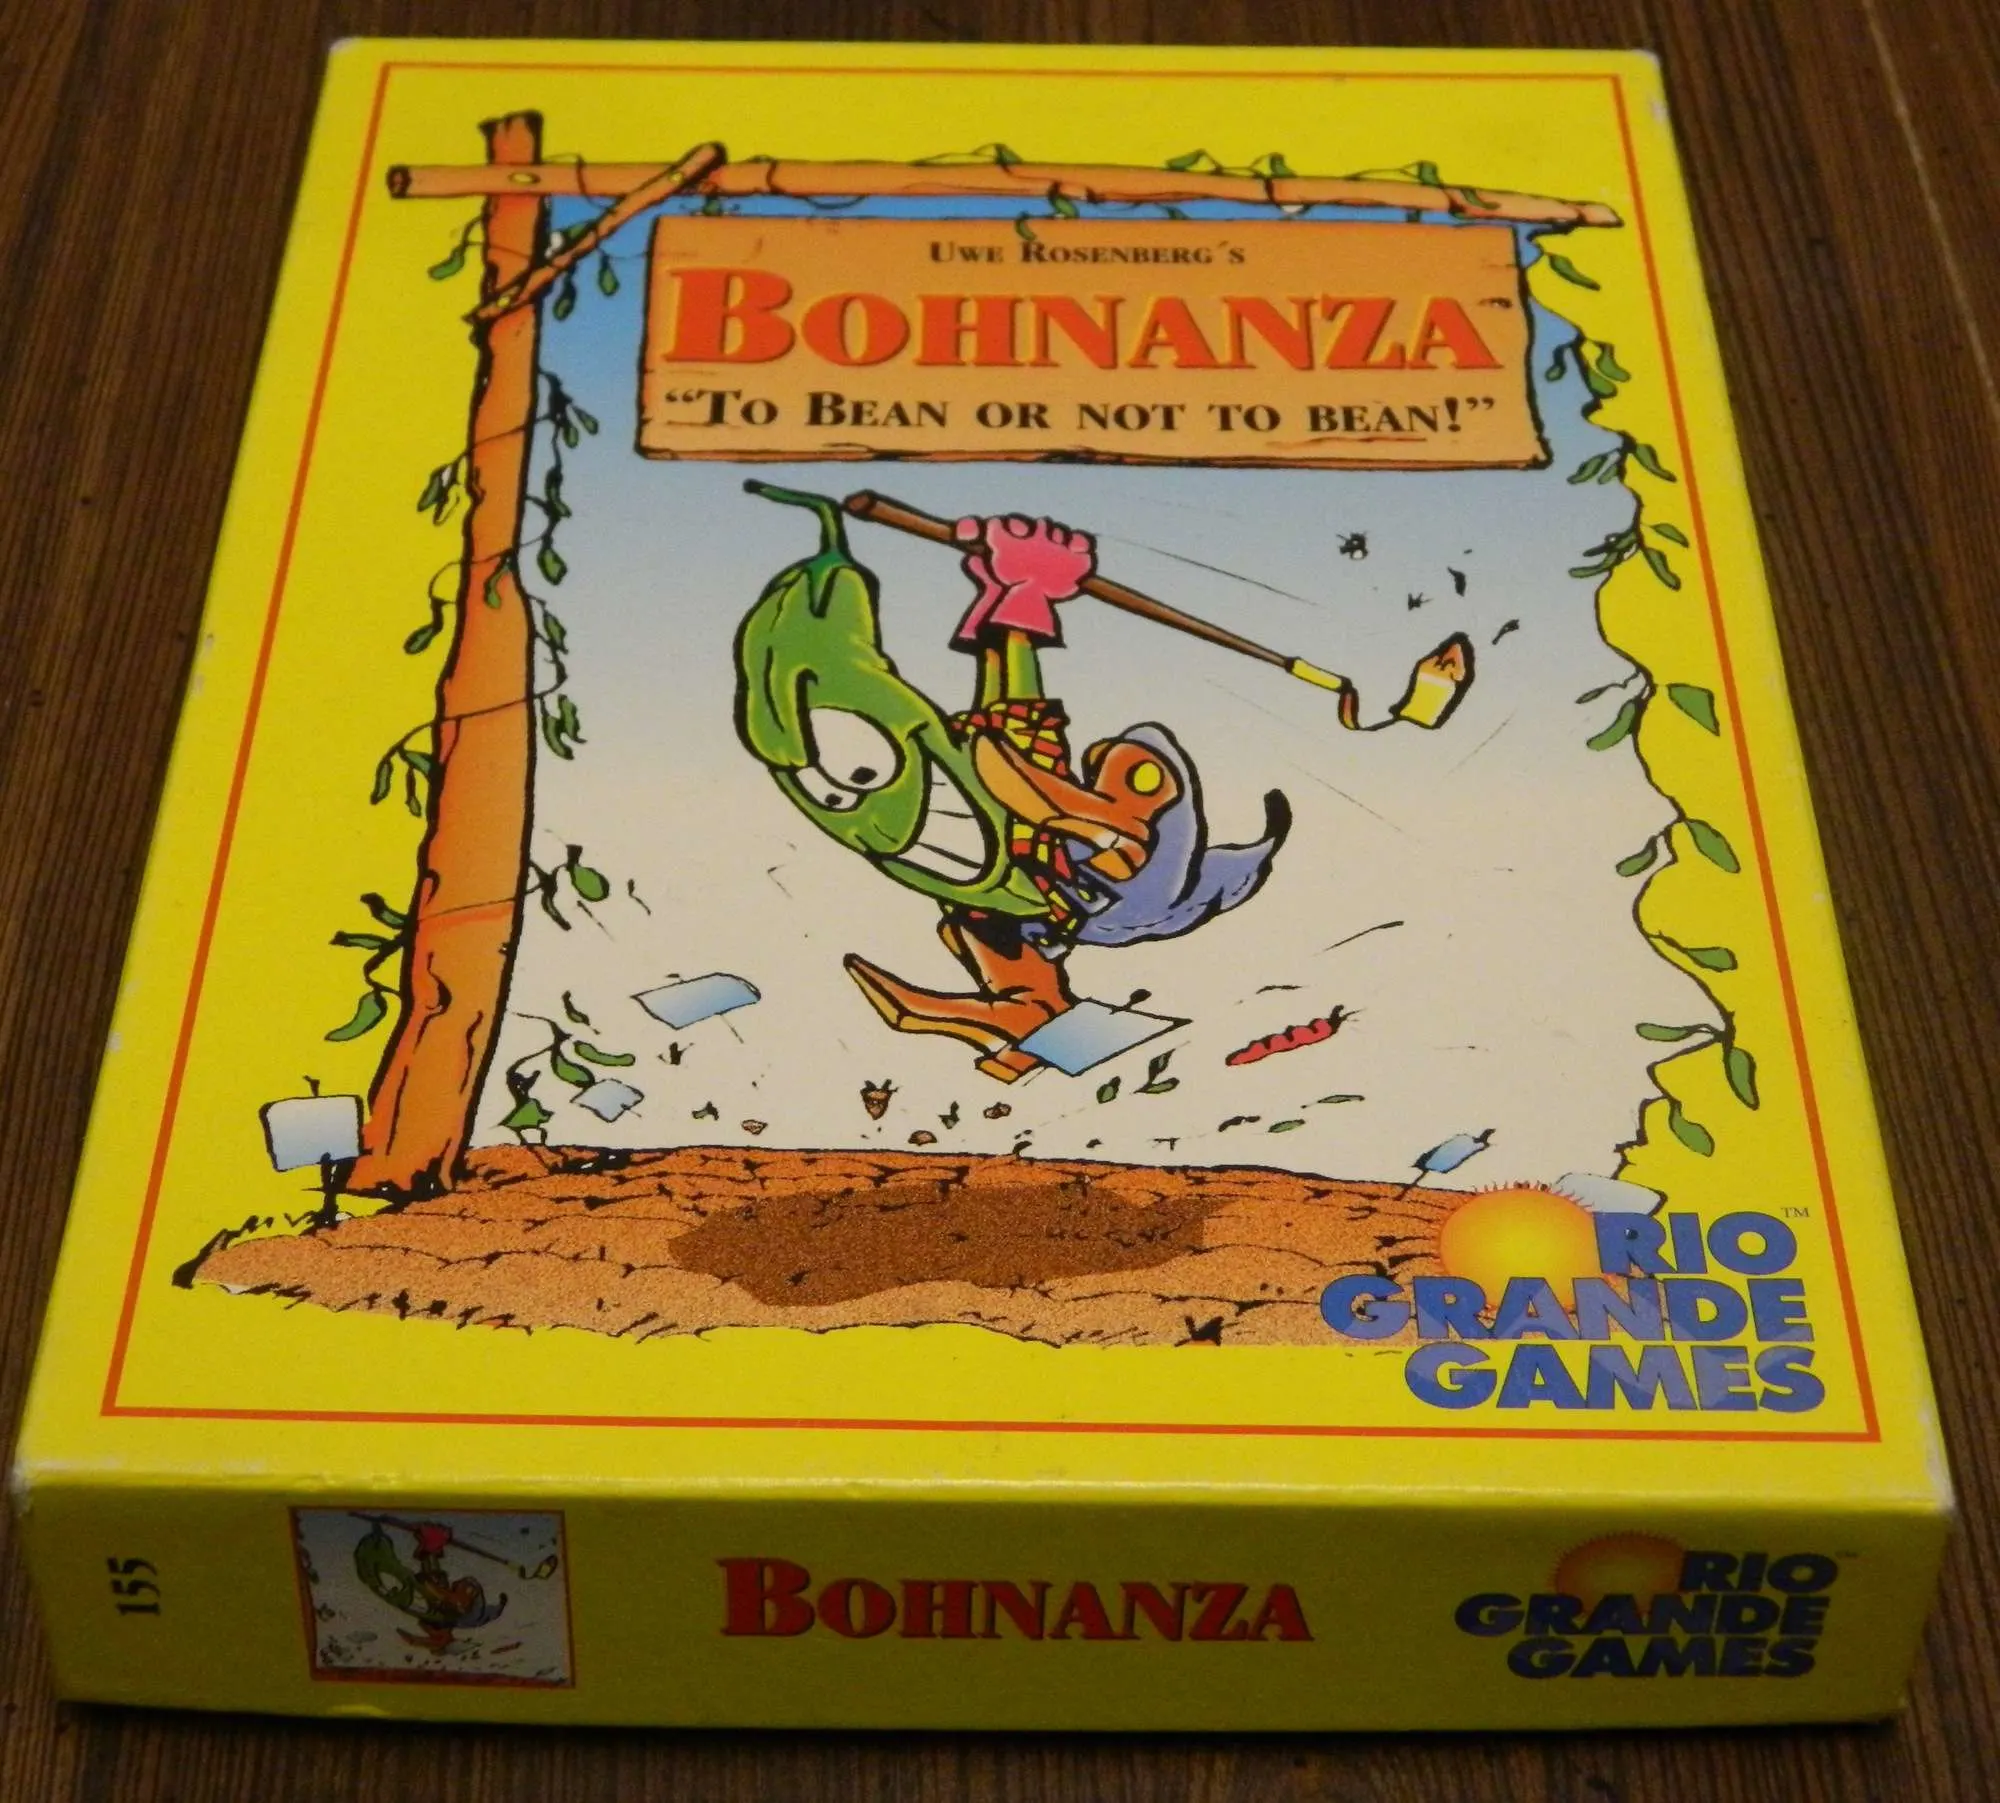 What is the objective of the game Bonanza?